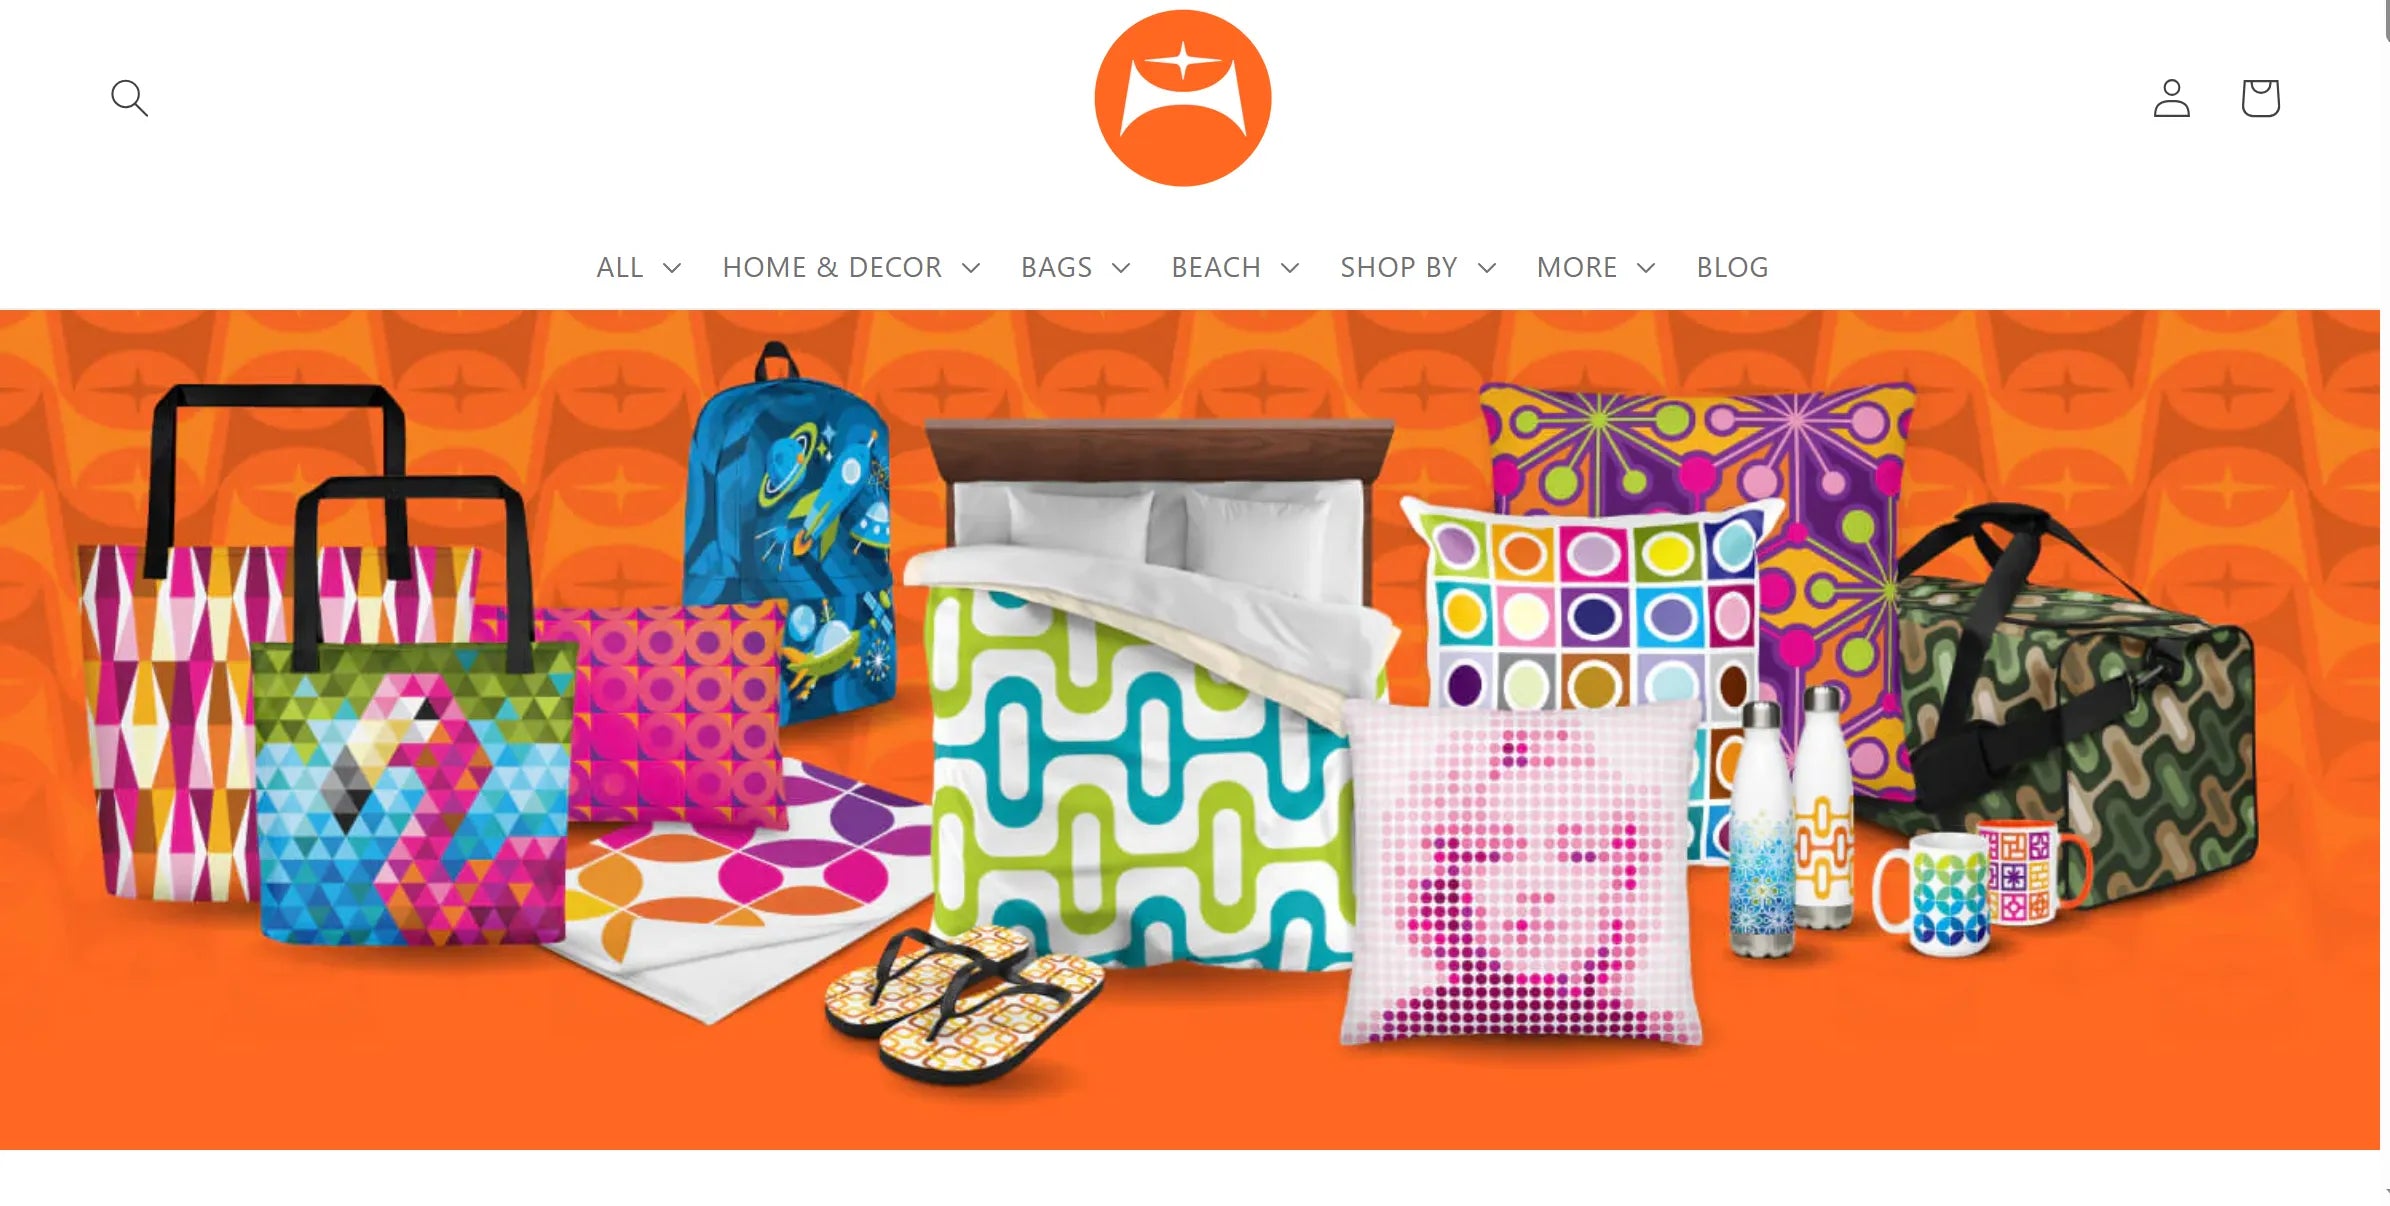 Various items including bags, bedsheets, pillows, and carpets in bright colors